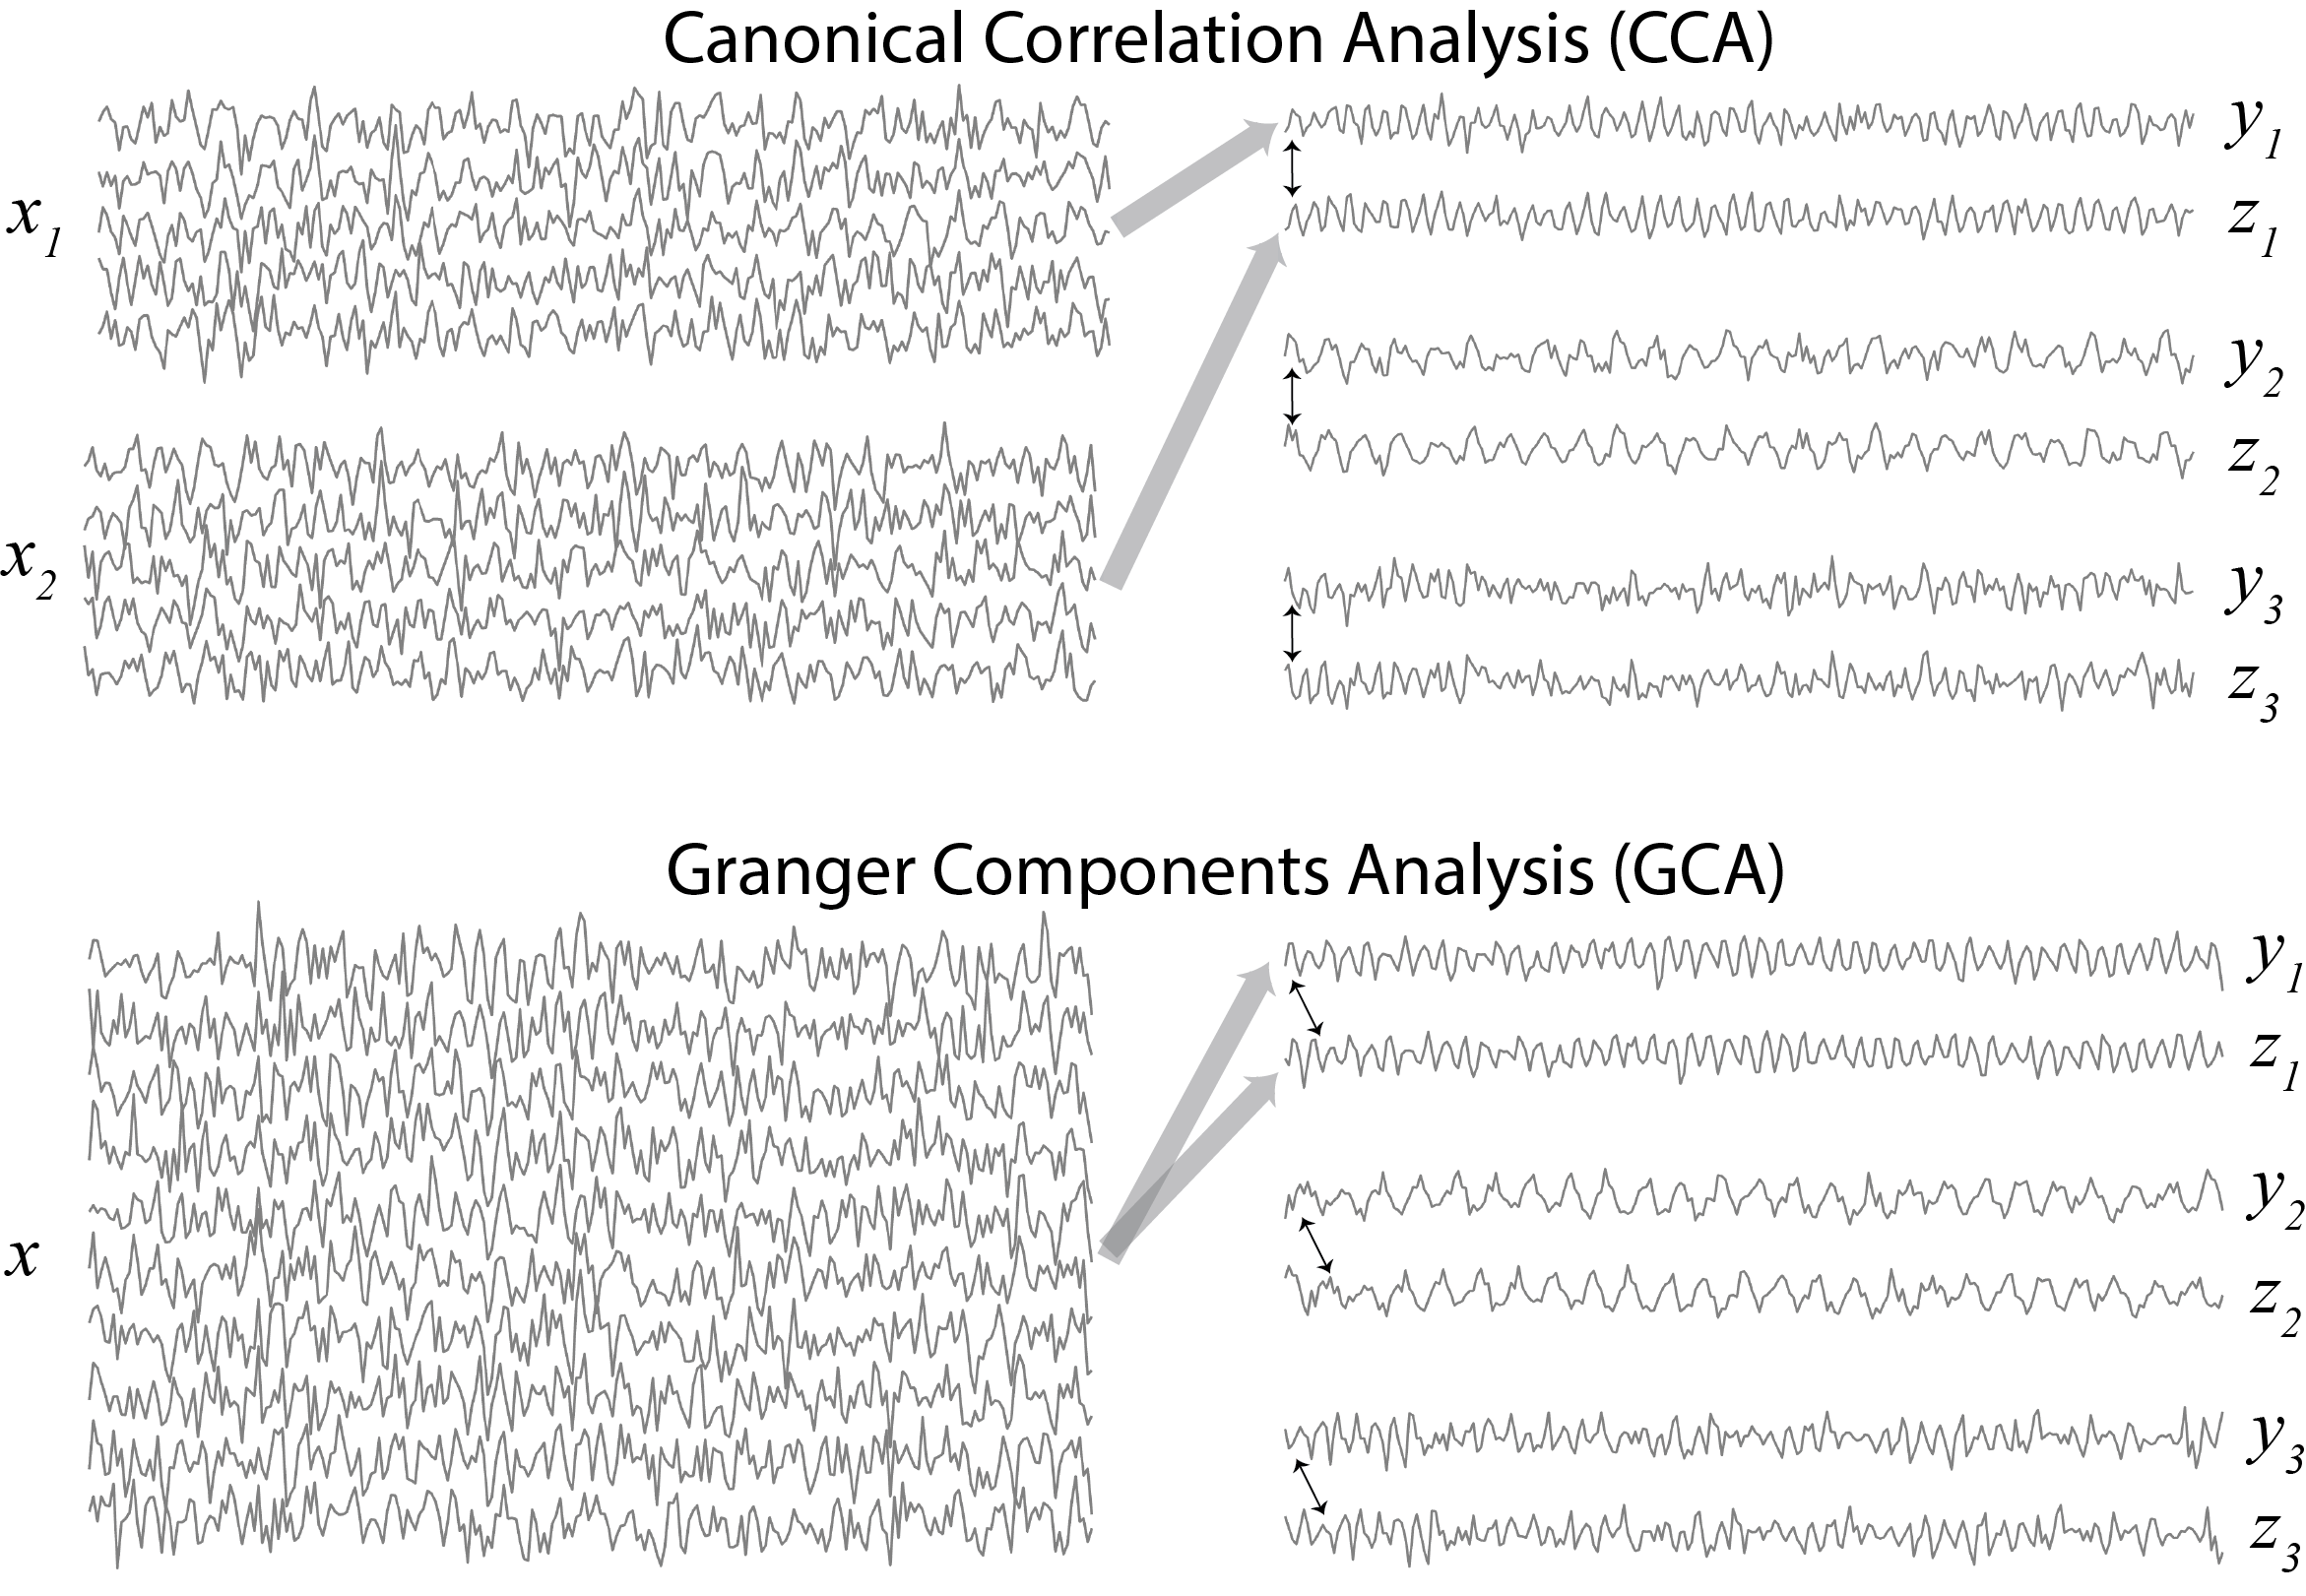 A diagram of Granger Components Analysis